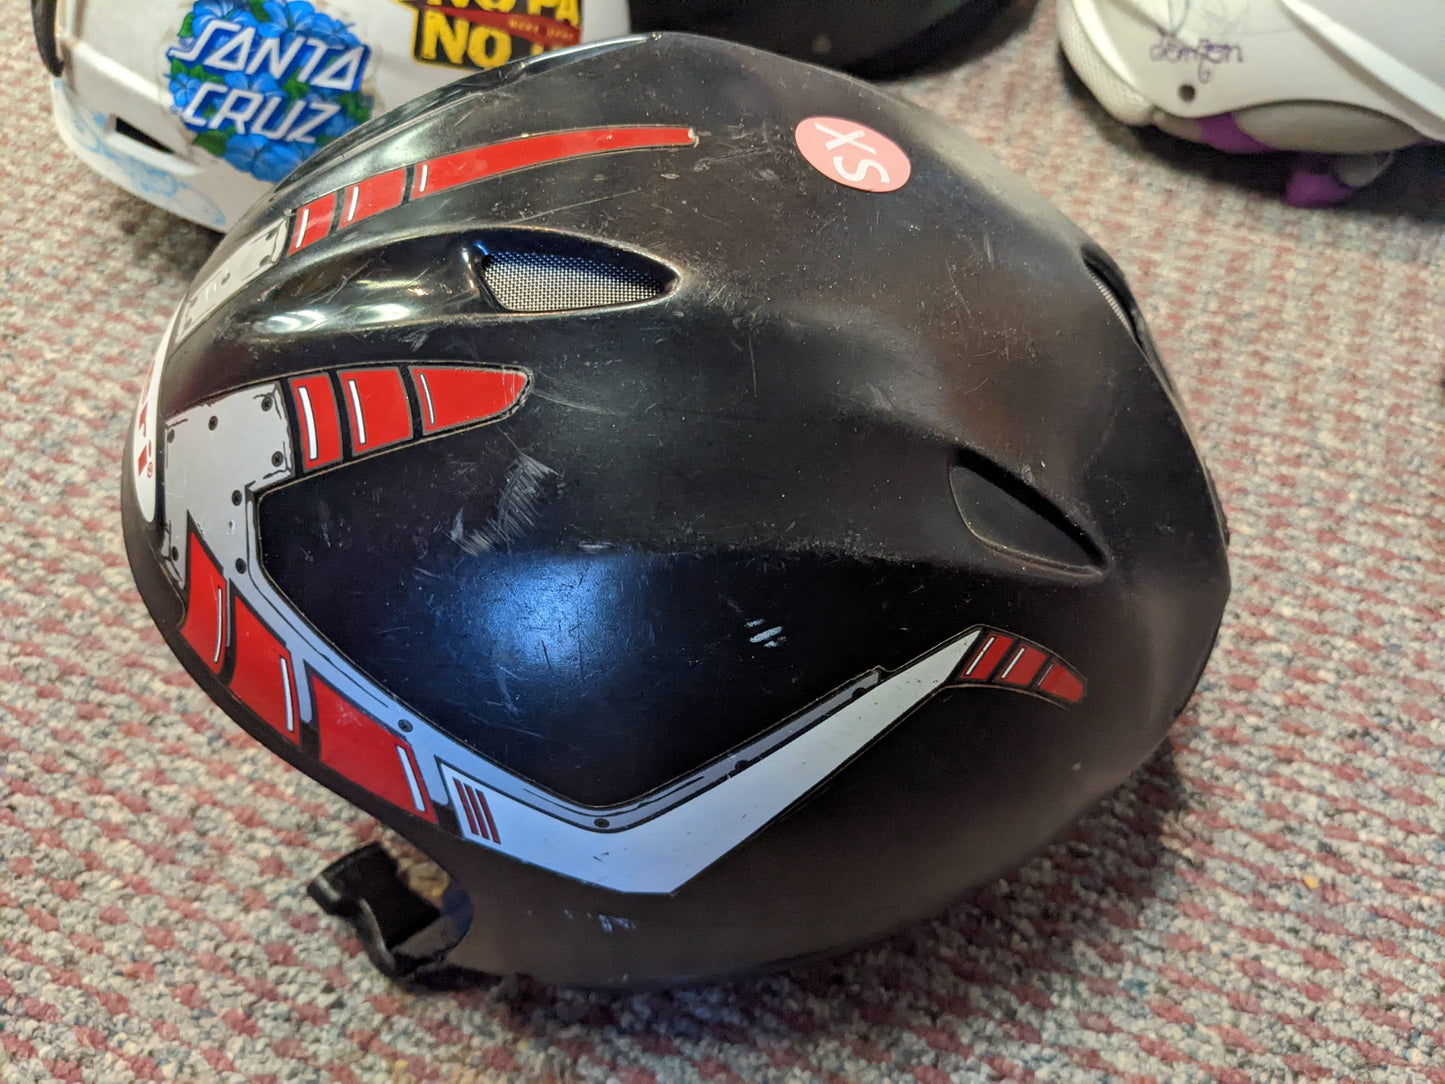 Ski Helmets, Assorted Sizes, Assorted Colors, Used